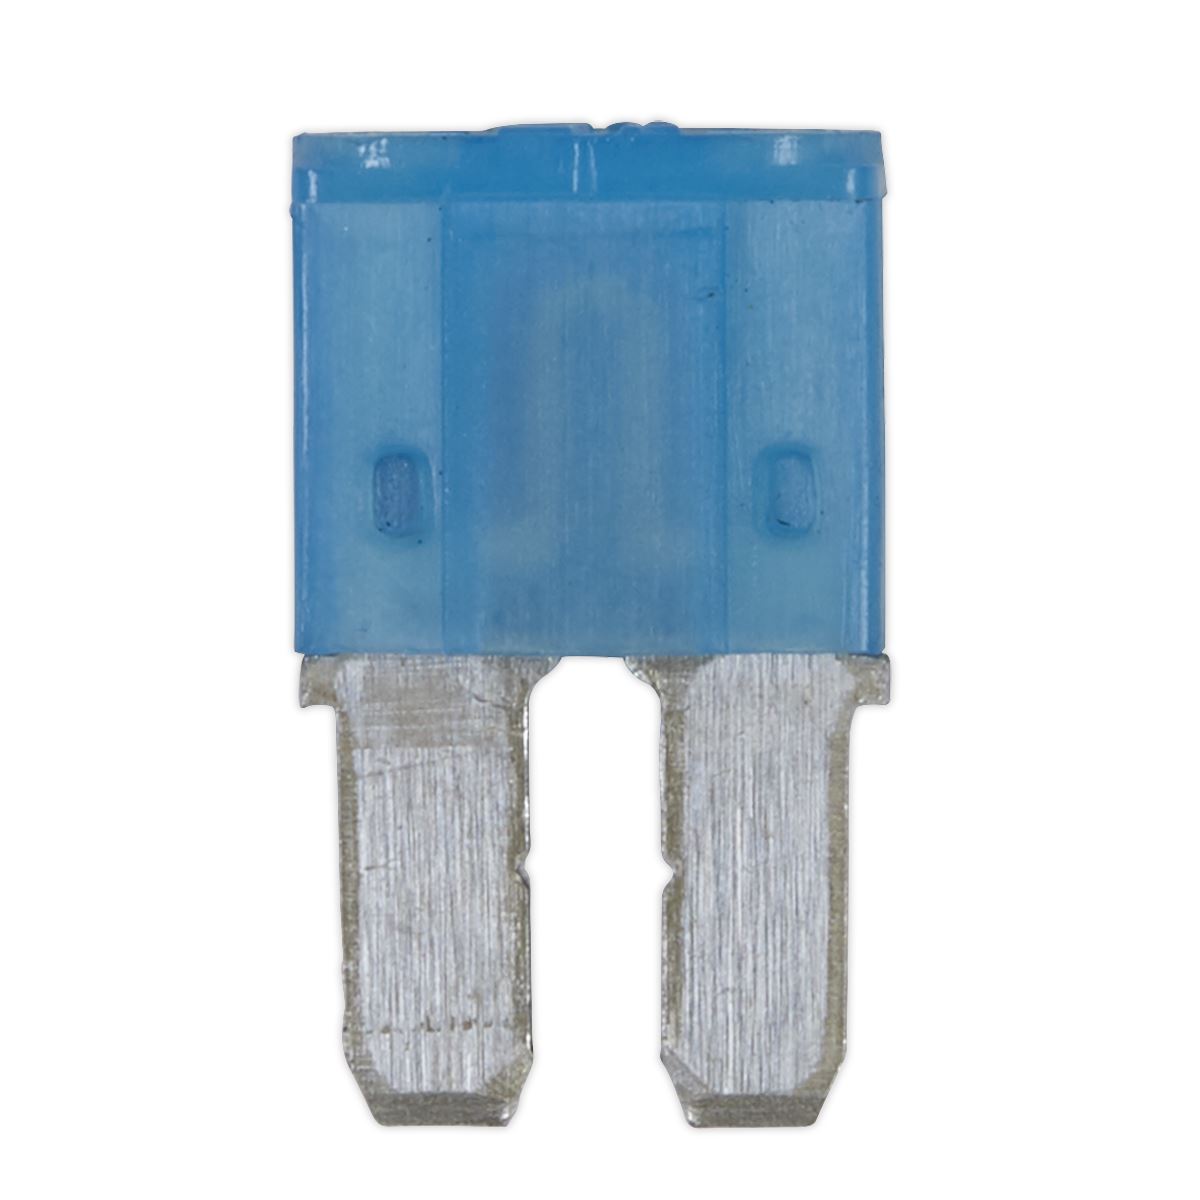 Sealey Automotive MICRO II Blade Fuse 15A - Pack of 50